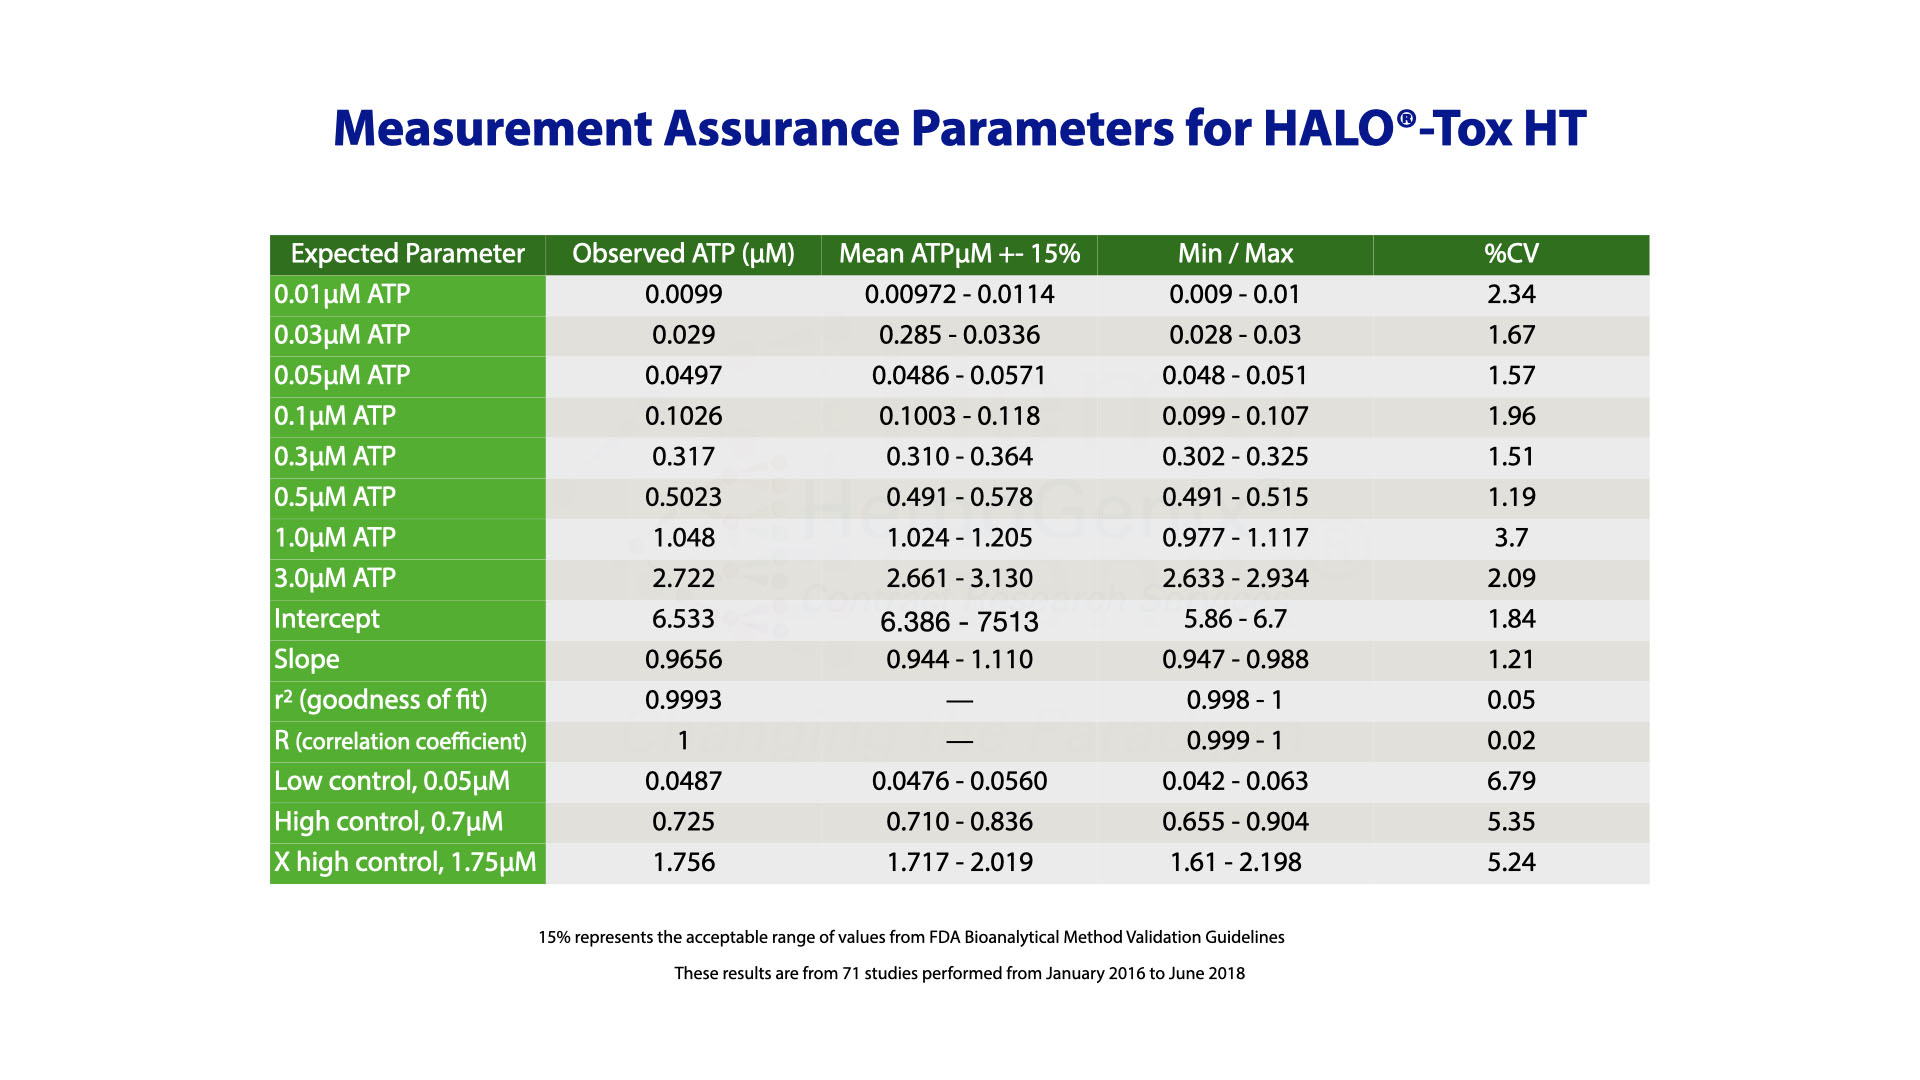 Measurement Assurance Parameters for HALO-Tox HT